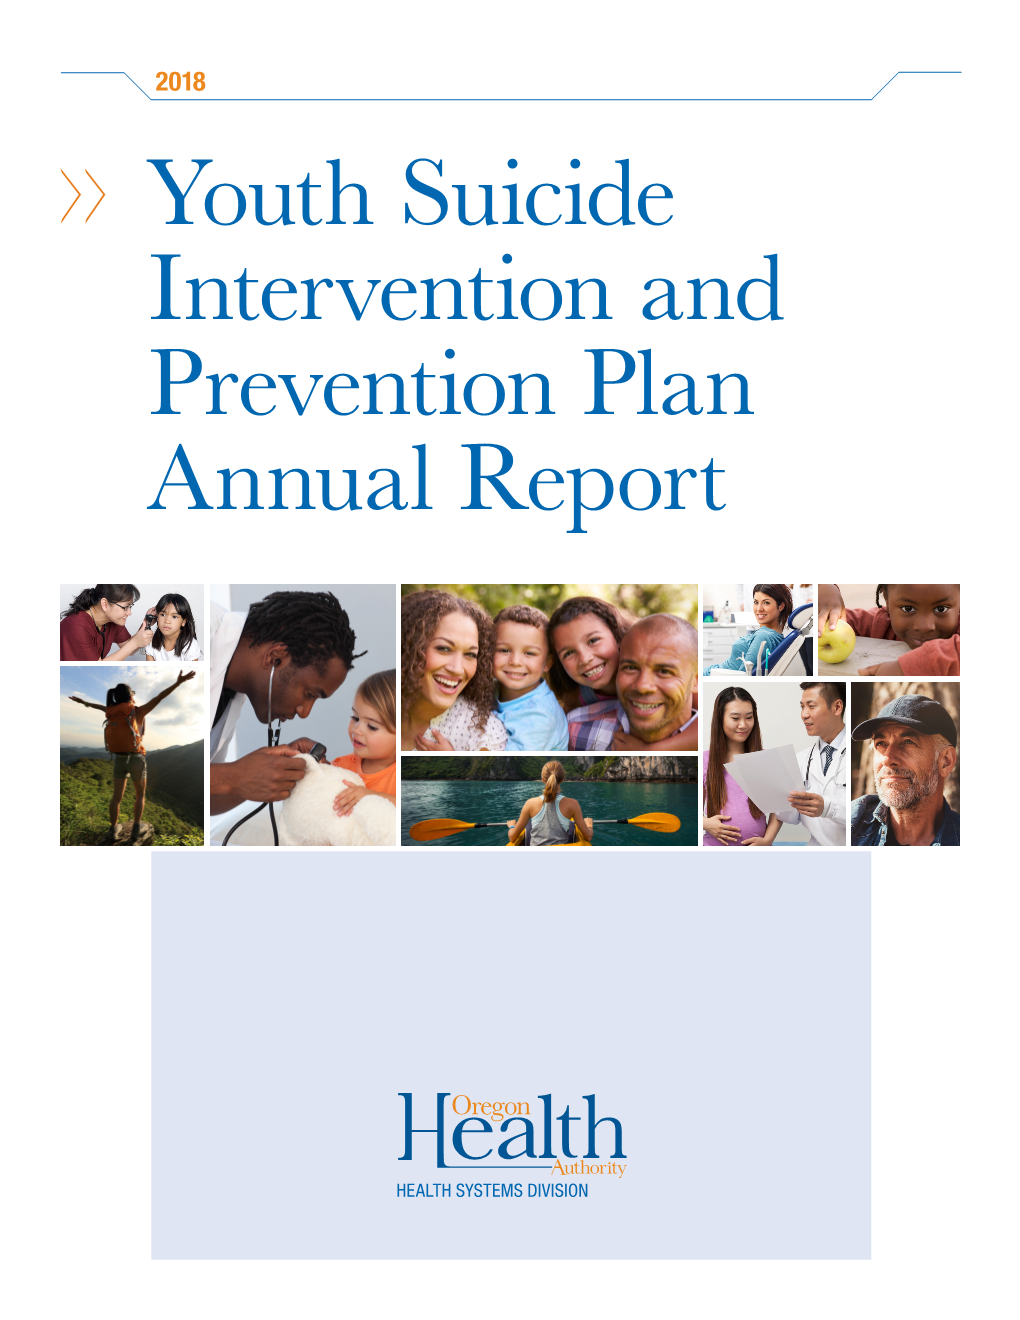 2018 Youth Suicide Intervention and Prevention Plan Annual Report